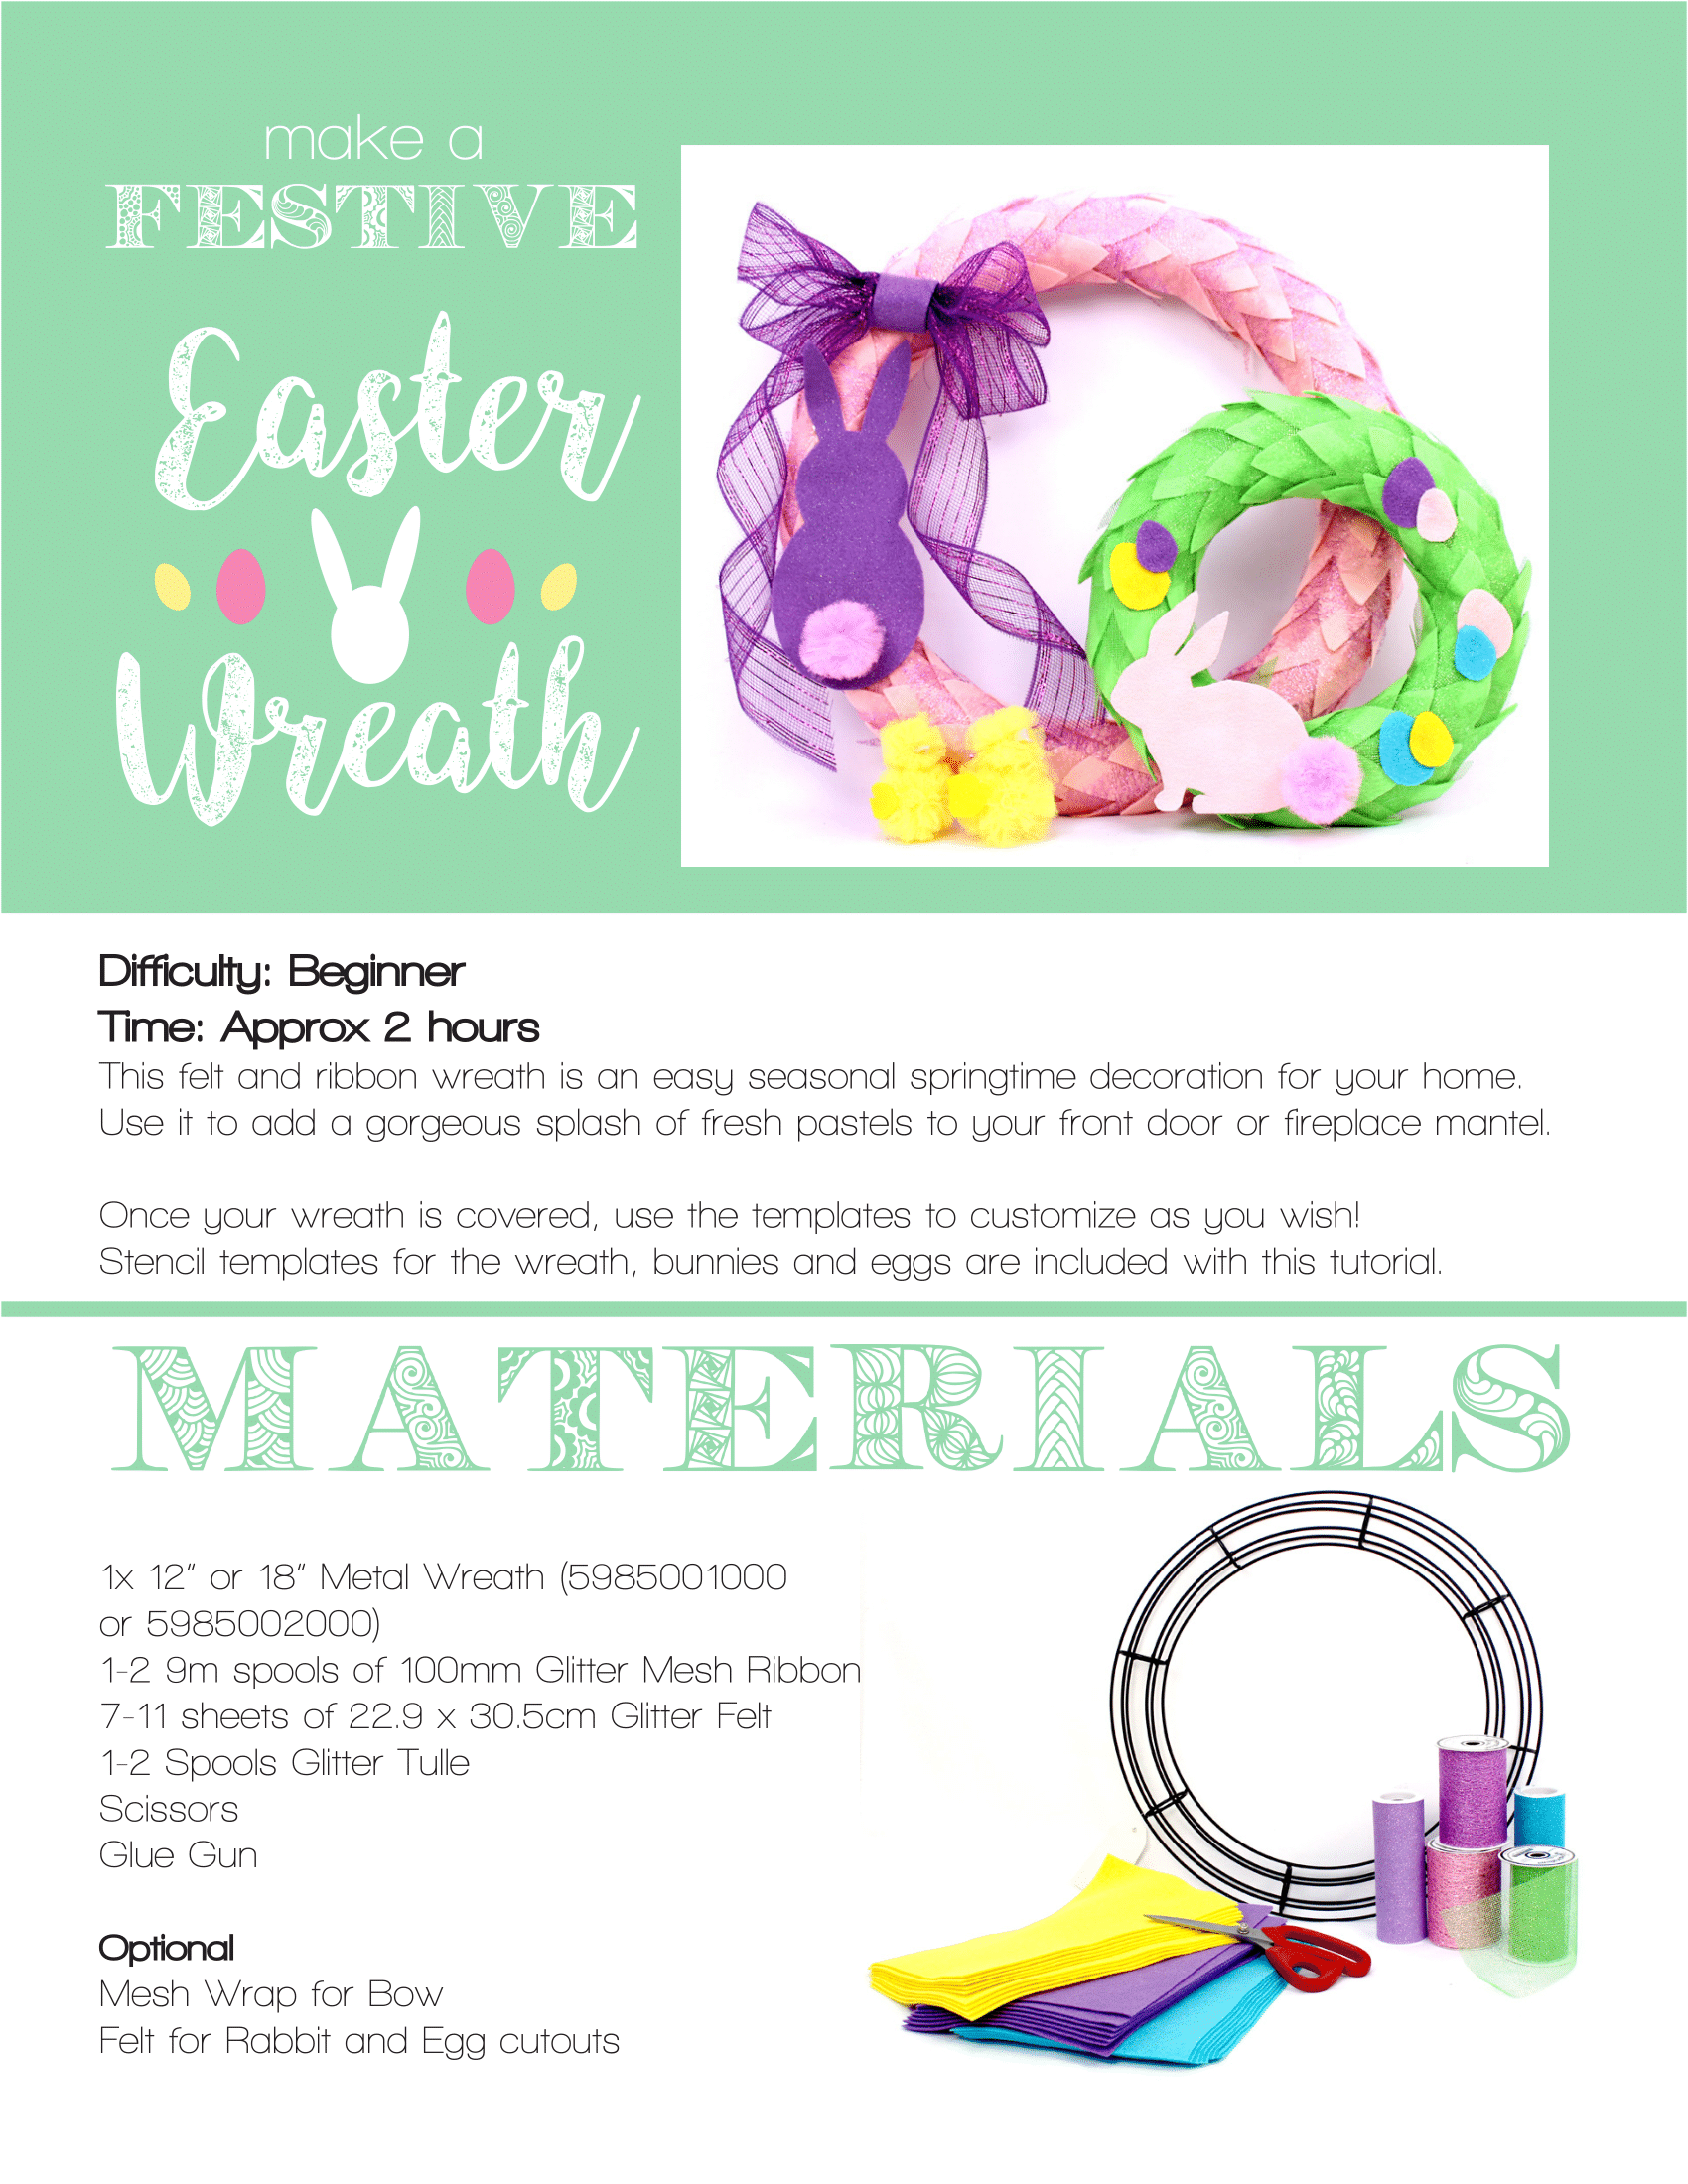 Materials required to make an Easter wreath